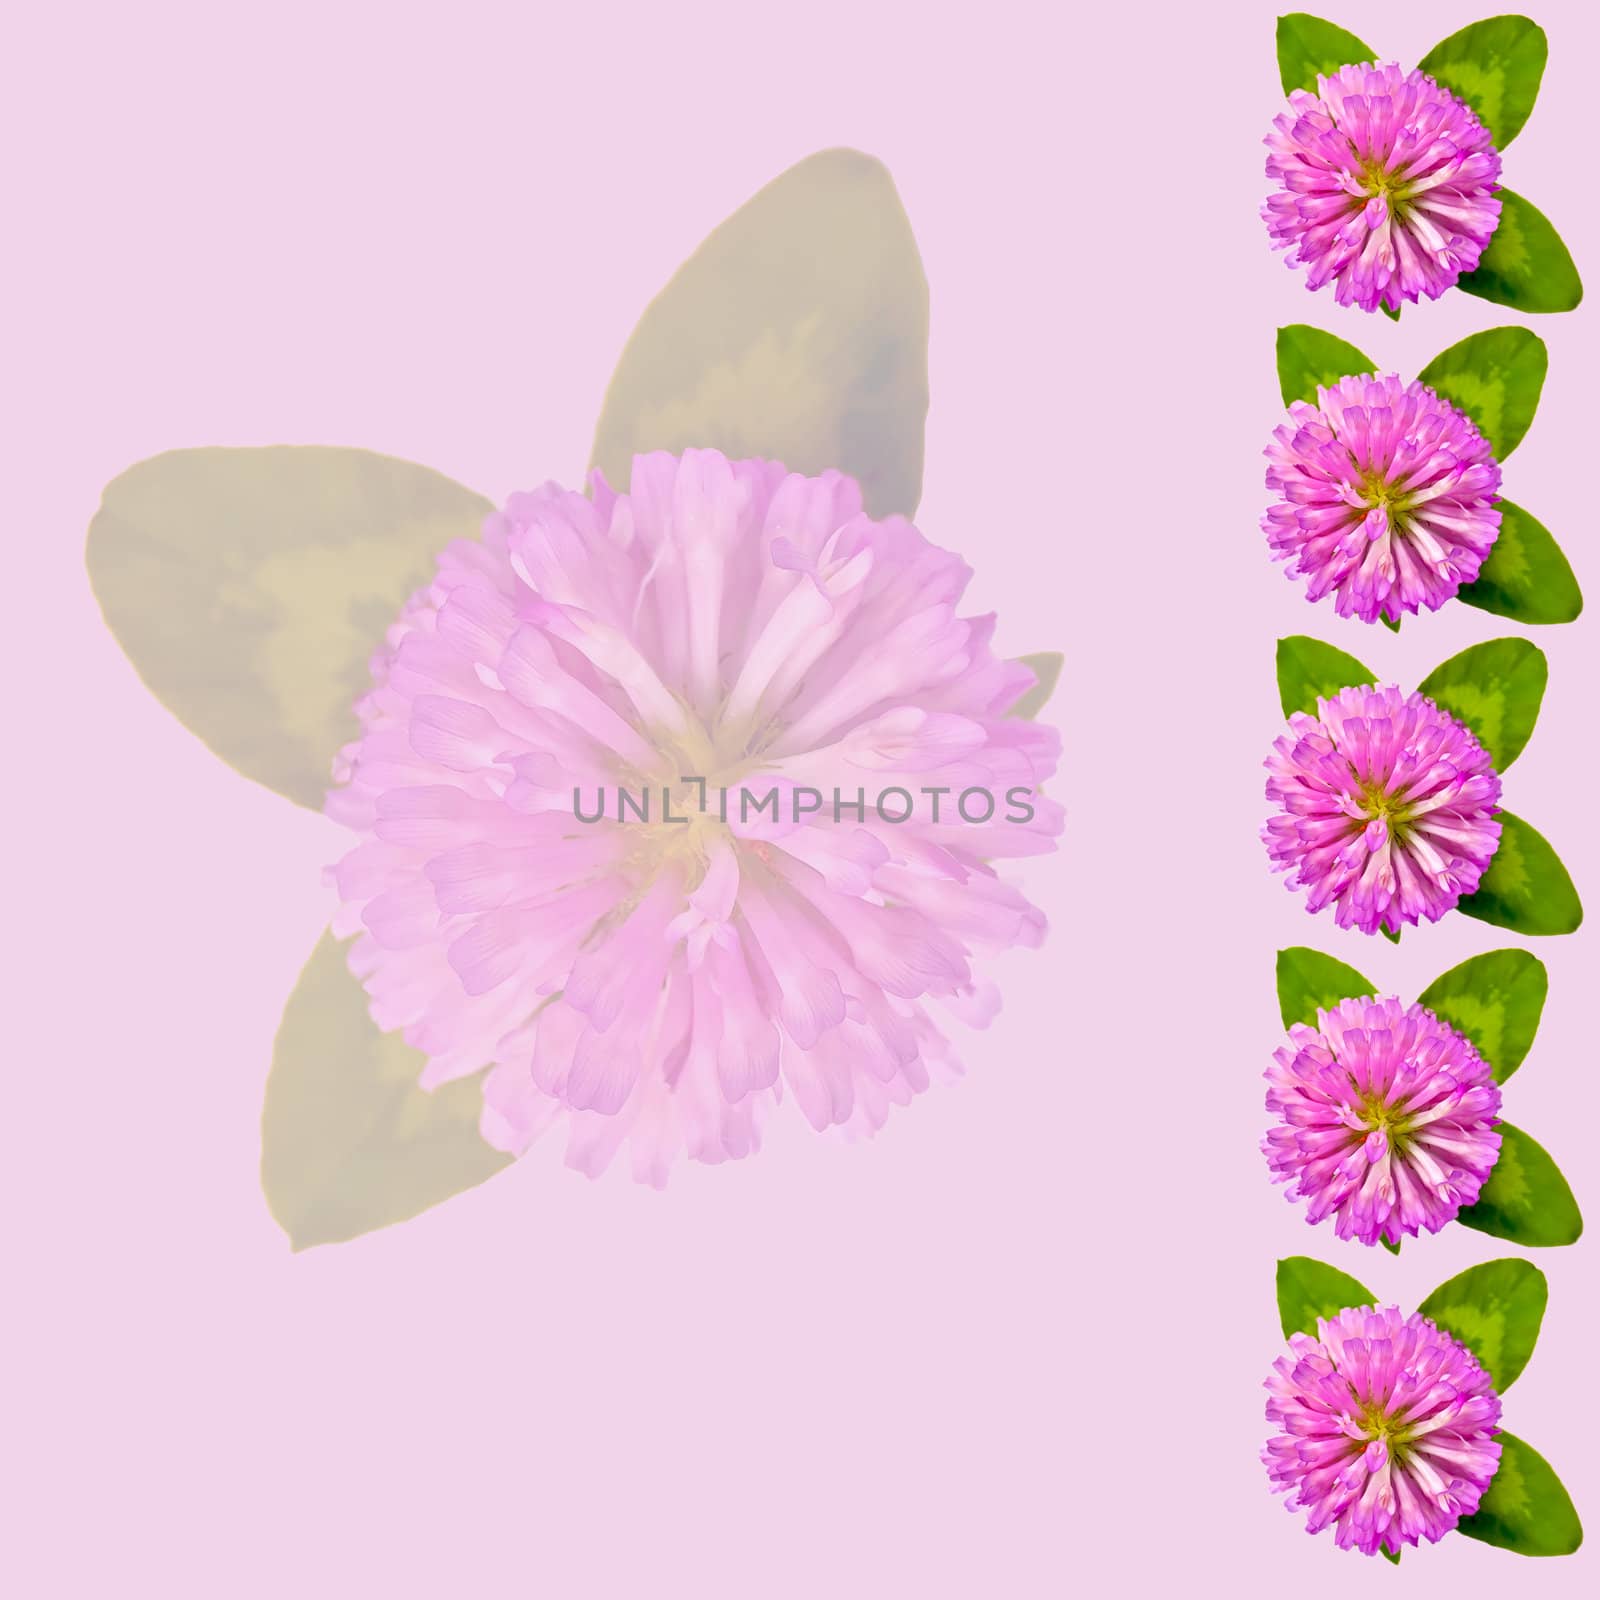 Frame of flowers and green leaves of clover isolated on pink background